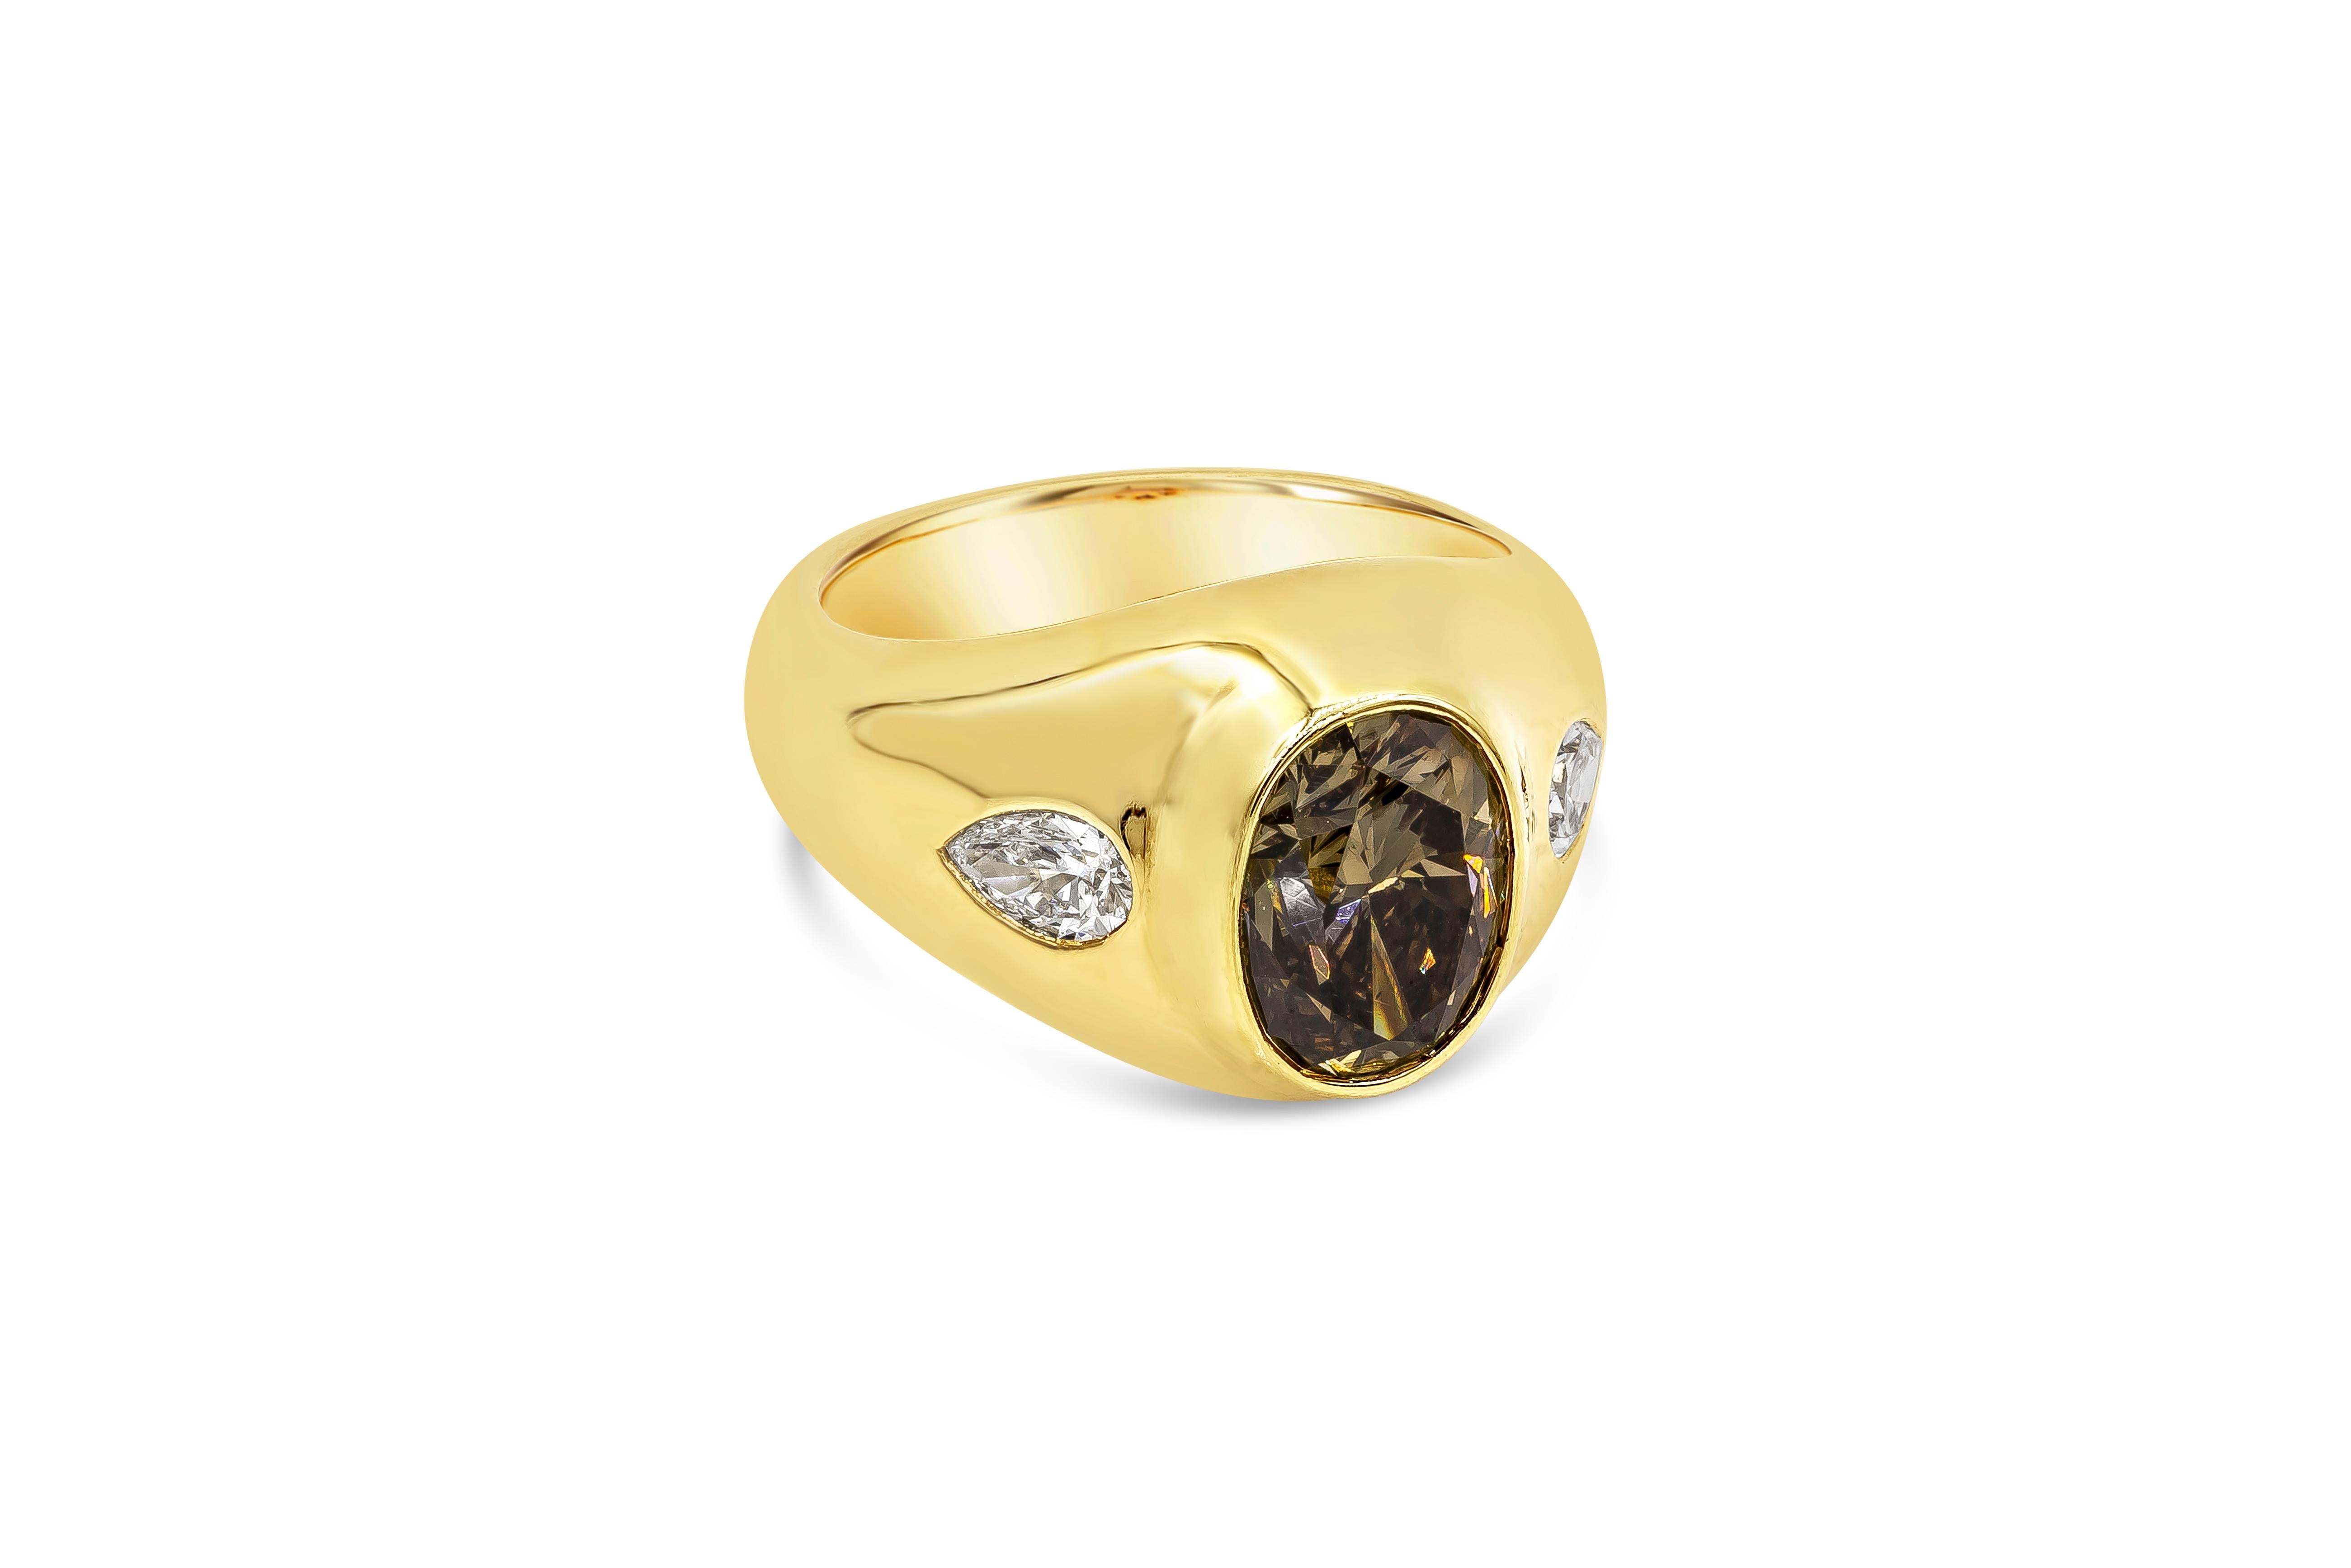 A unique gypsy style ring featuring a GIA Certified Oval Cut Fancy Dark Yellowish Brown color center stone weighing 3.01 carat, Set in a domed setting accented with two brilliant pear shape diamonds weighing 0.50 carats total. Made in 18K yellow